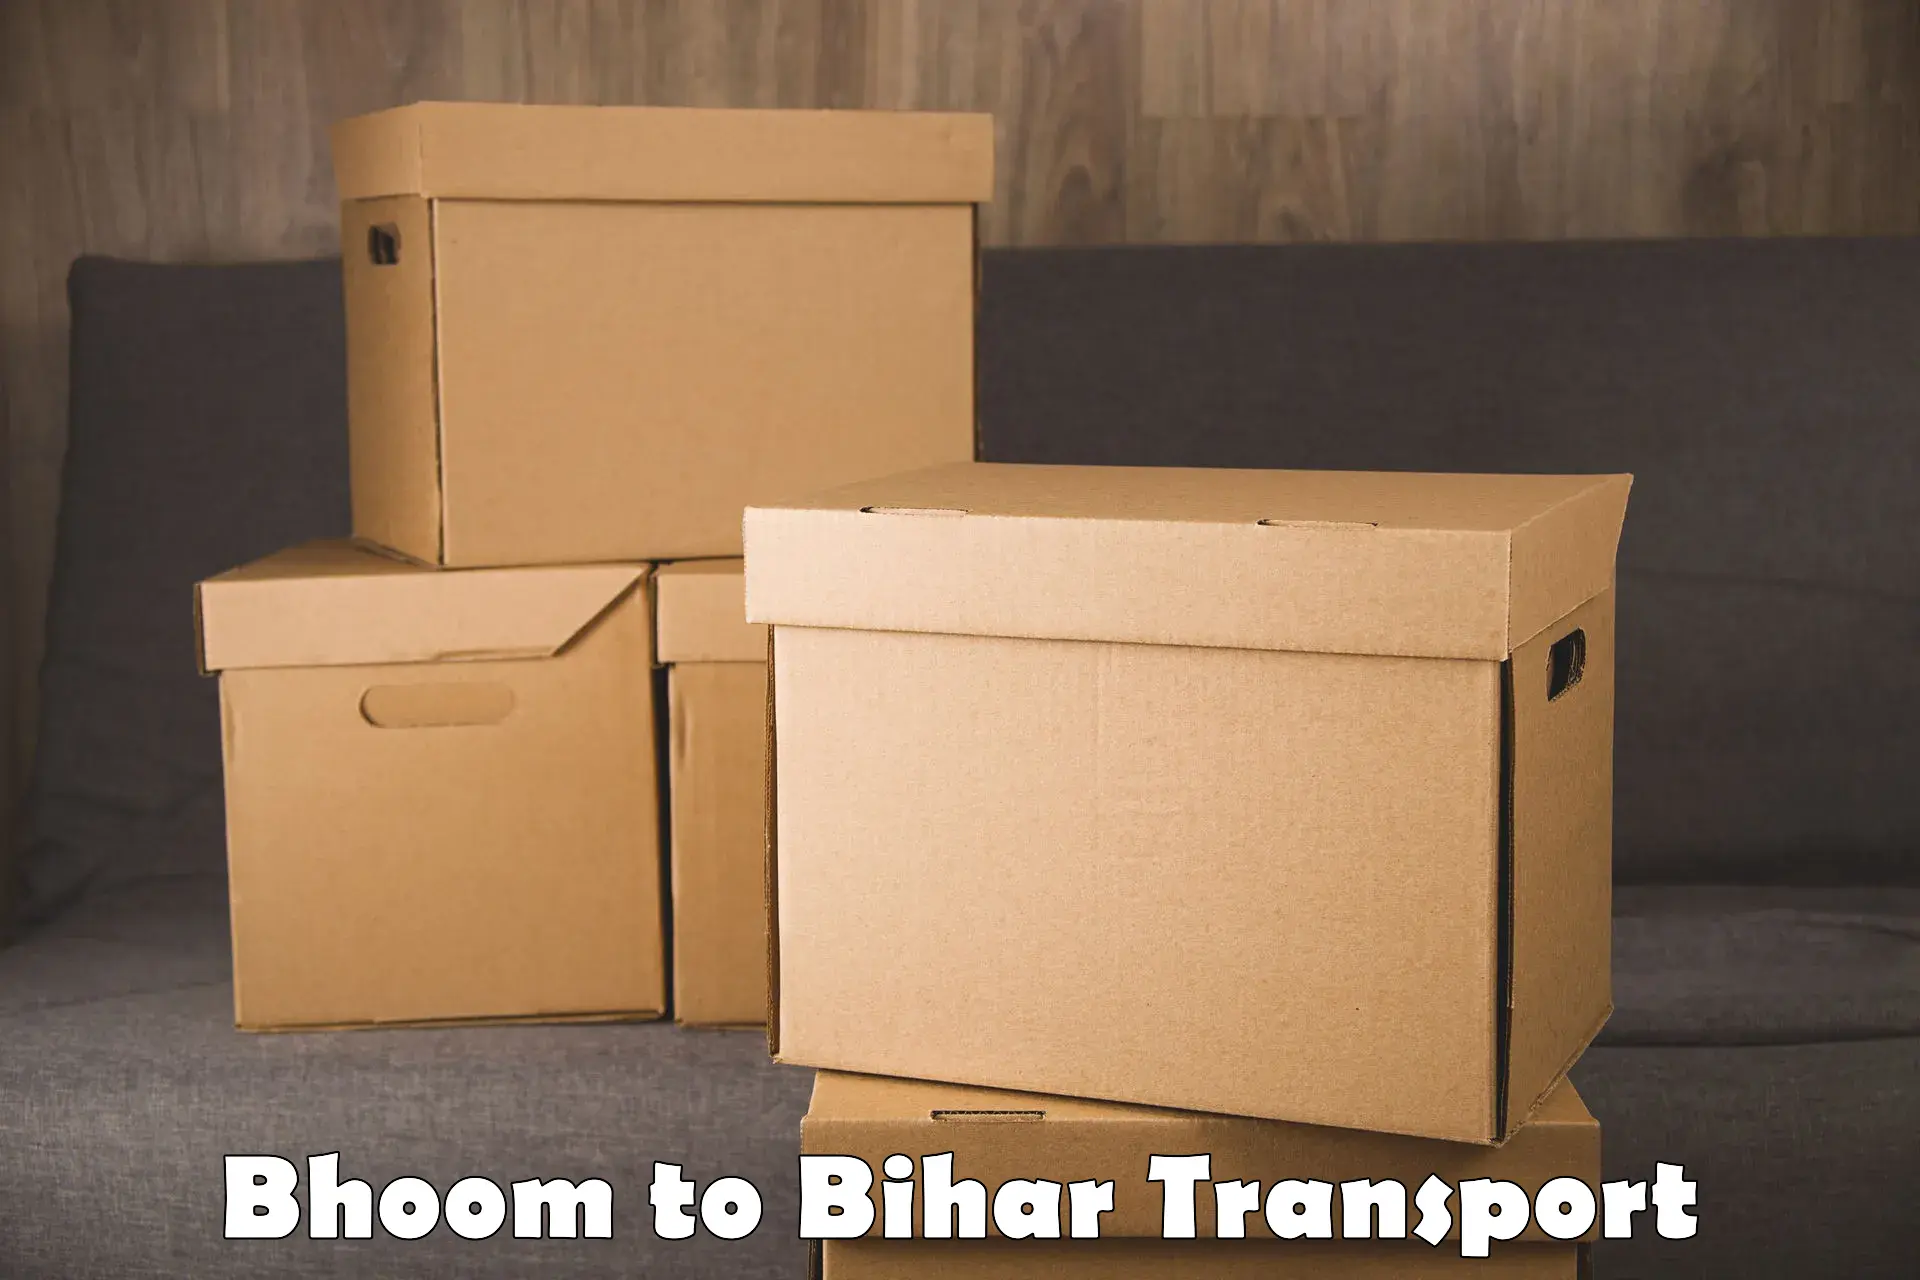 Shipping partner Bhoom to Sheohar